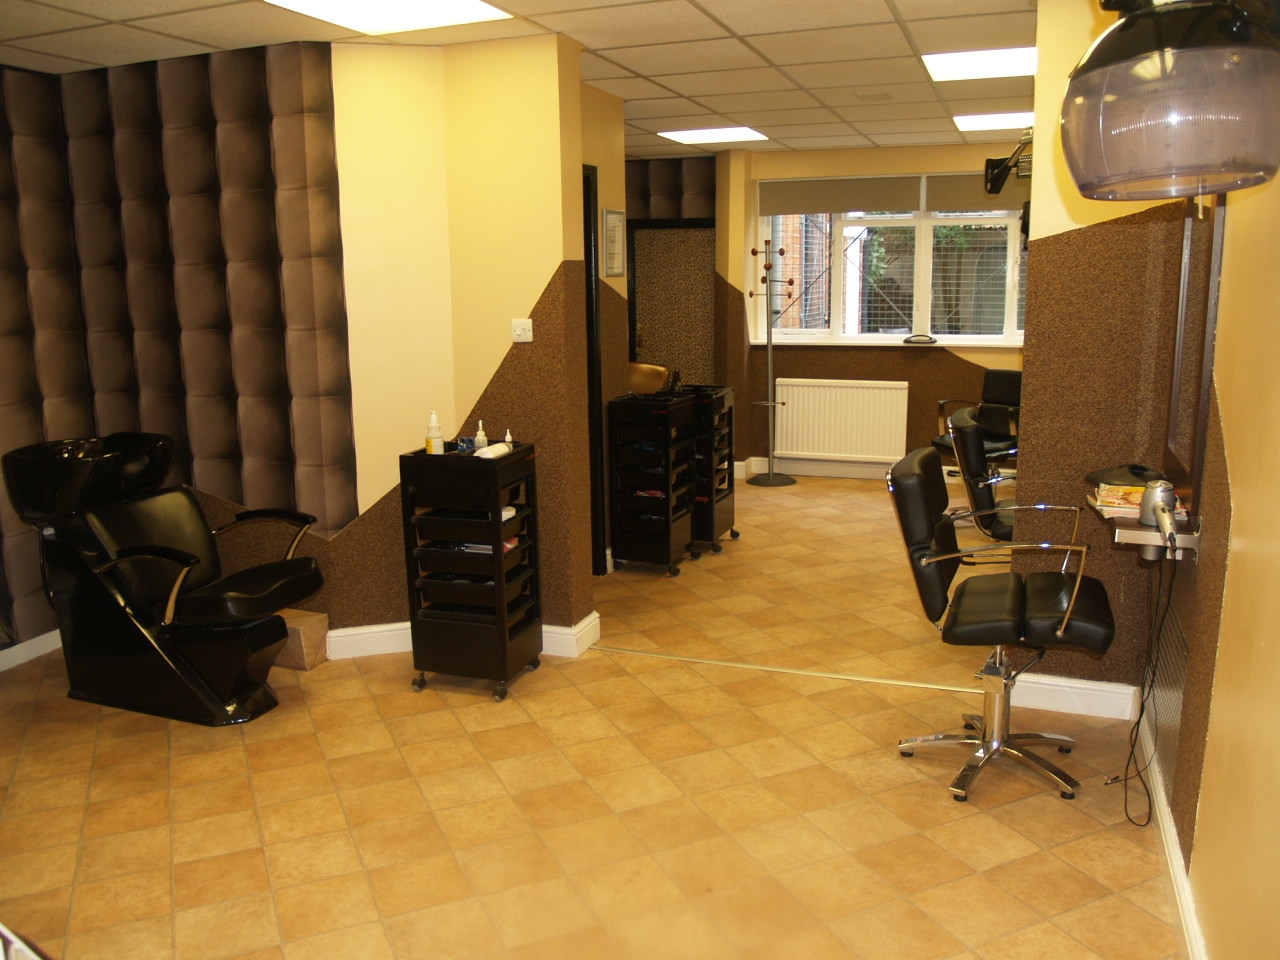 4 bedroom hairdressing salon & two apartments house SSTC in Birmingham - photograph 4.